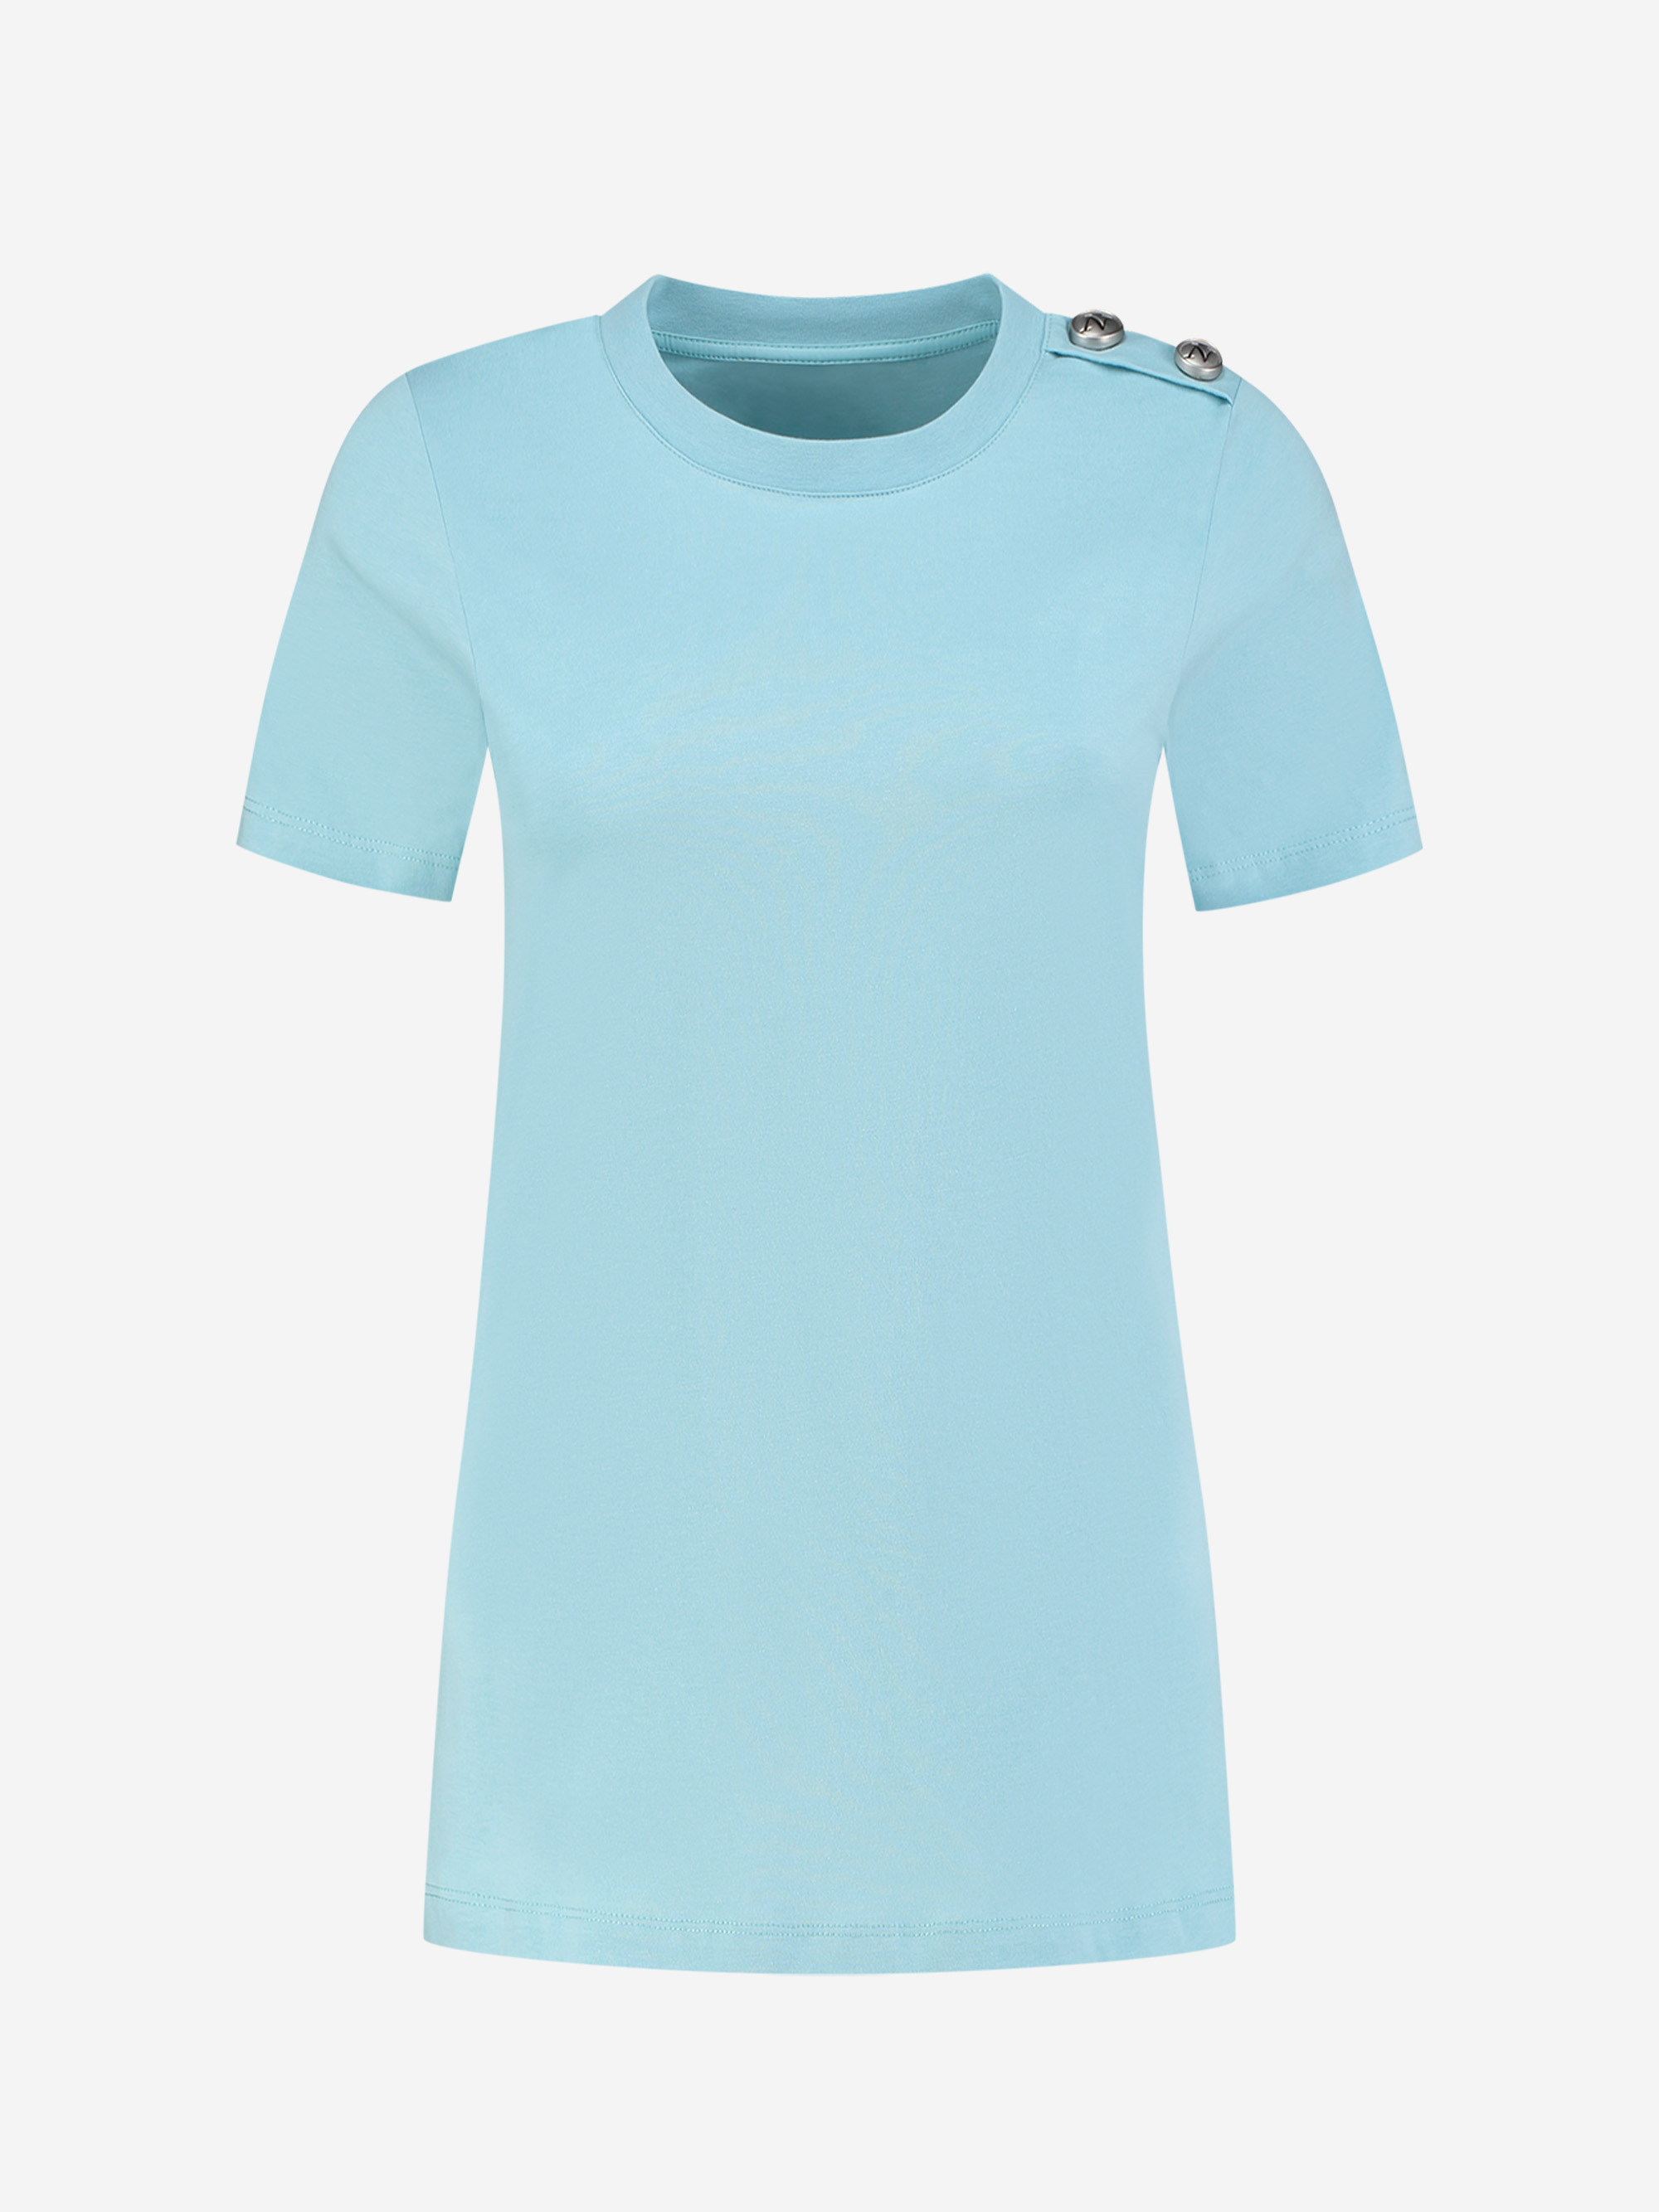 T-shirt with small buttons on shoulder